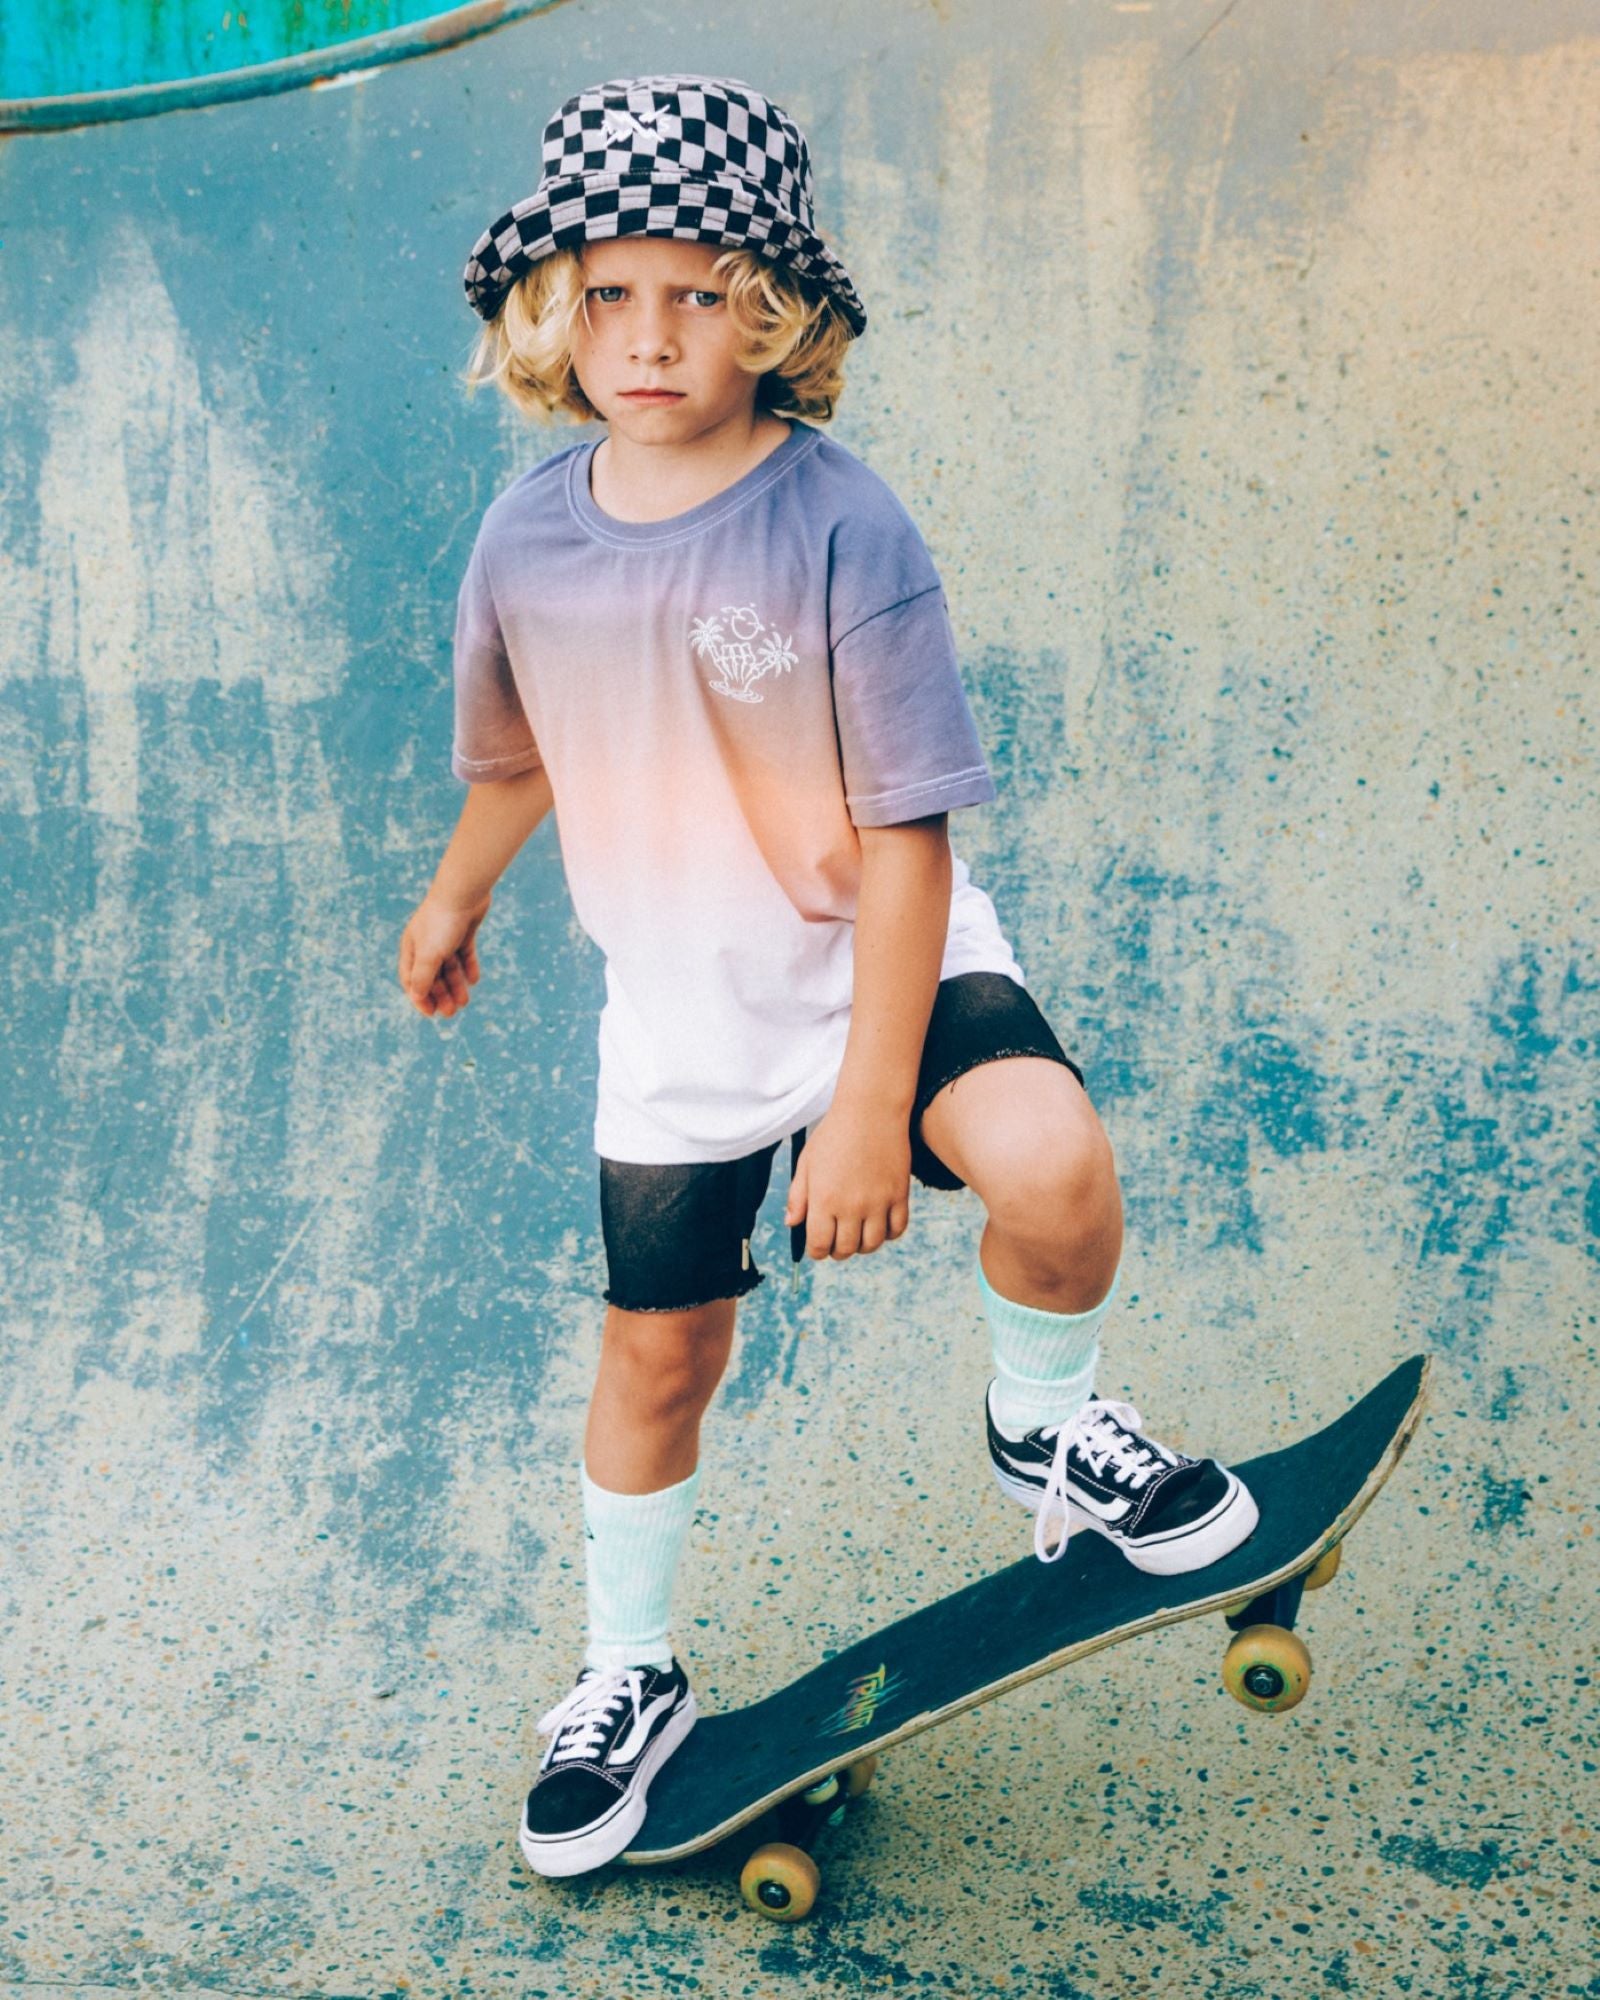 Alphabet Soup's Kids Venice Dip Dye Tee for boys aged 8 to 16. Featuring 100% Cotton Jersey, a box tee fit, and short sleeves. It comes in a Blue/Peach/White colourway with 3-colour dip dye and shaka prints on both chest and back.